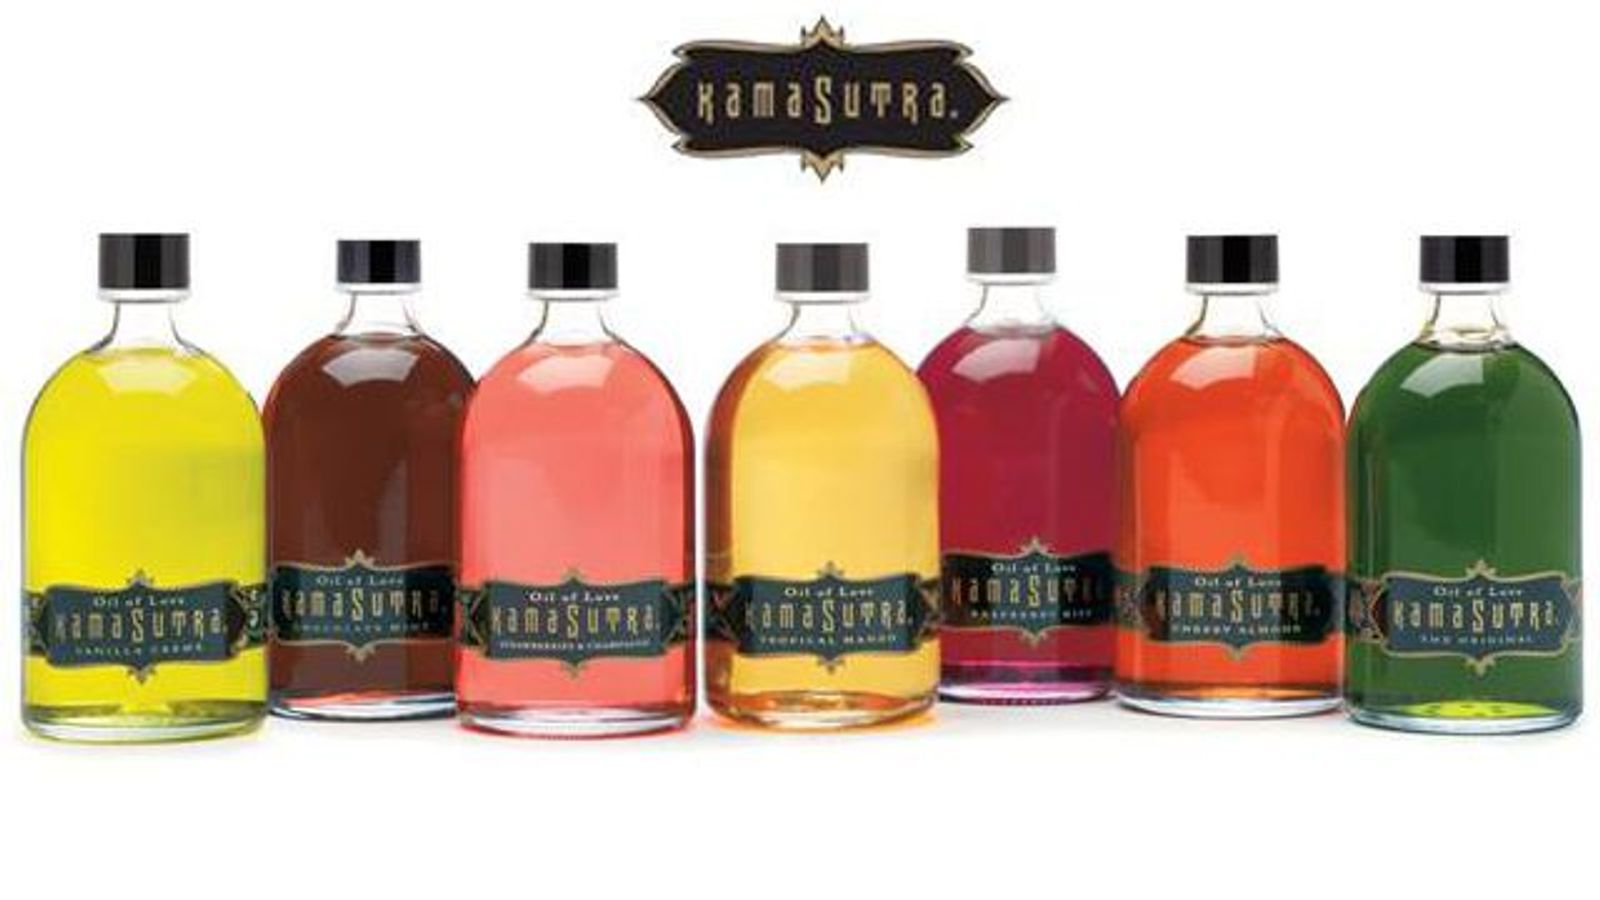 Honey’s Place Named Exclusive Distributor of Kama Sutra